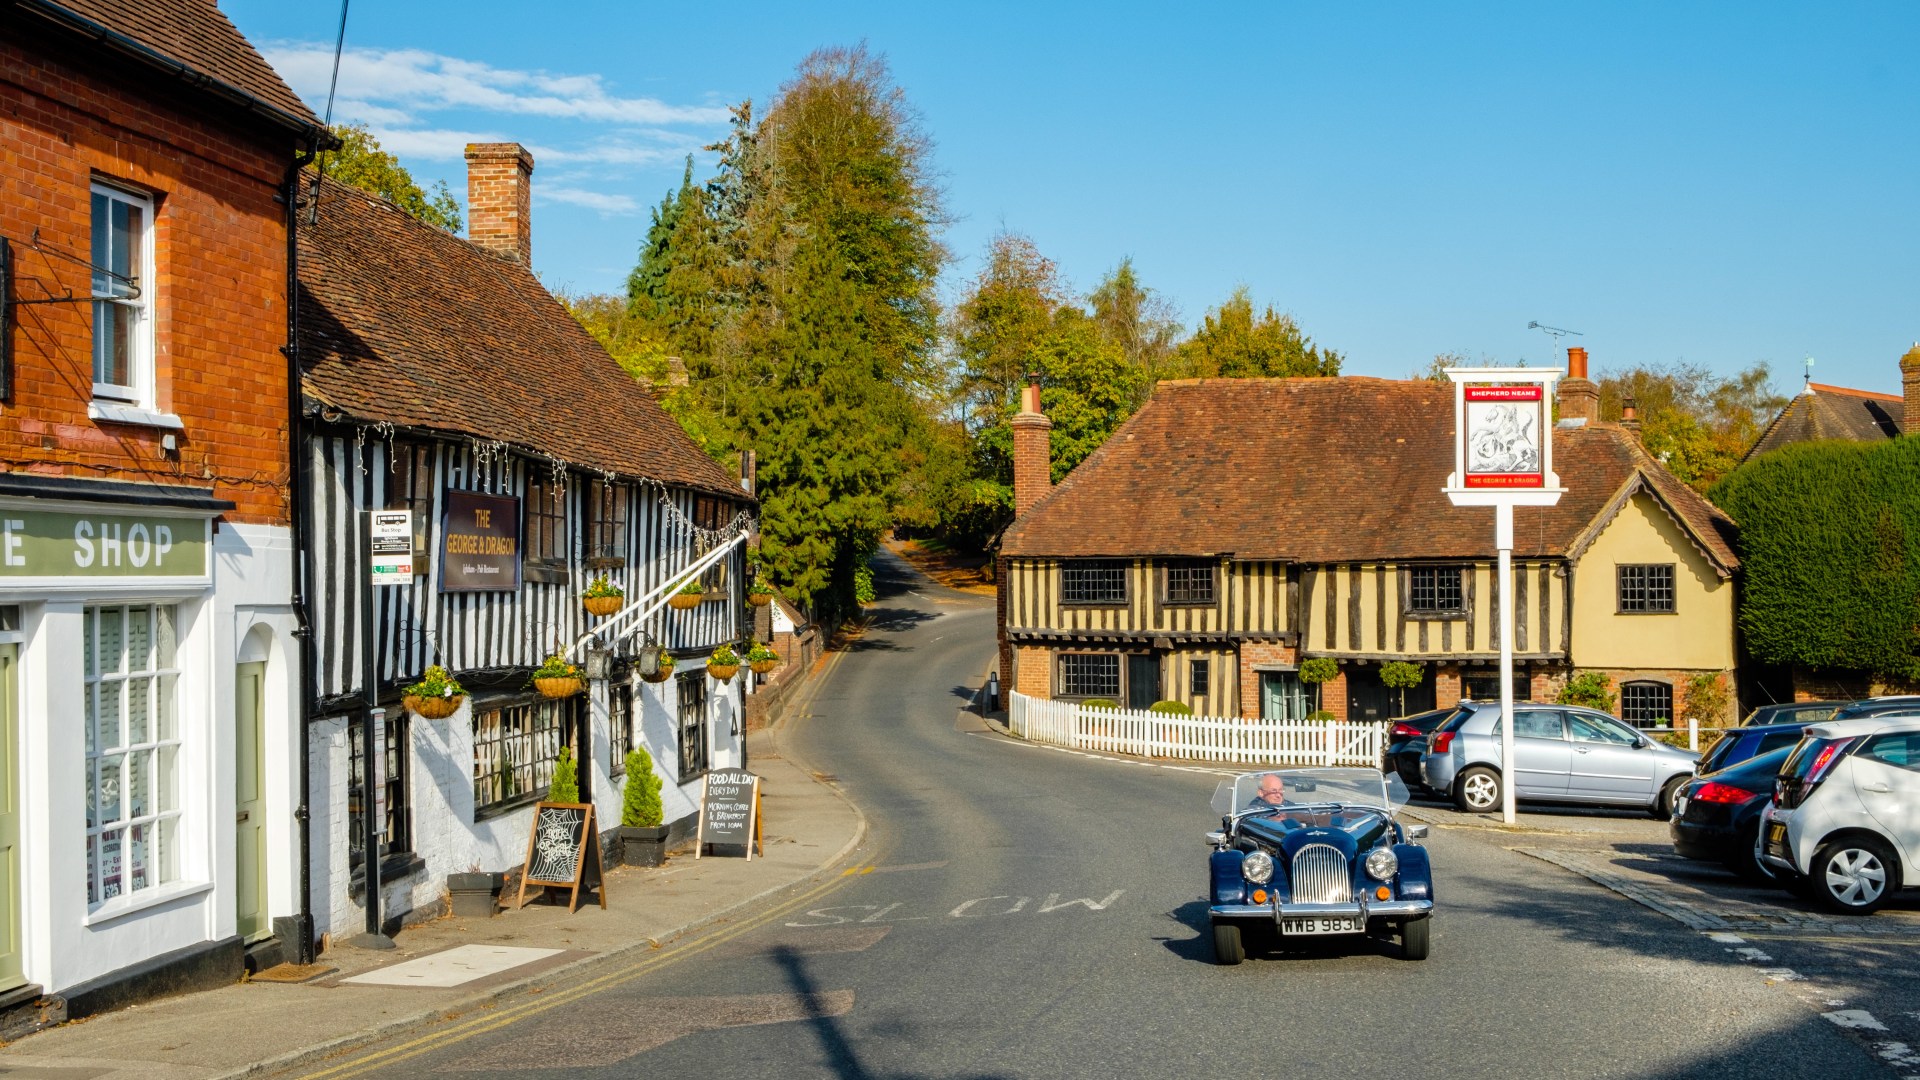 Discover the ‘World’s Best Pub’ and 700-Year-Old Charm in the Idyllic English Village